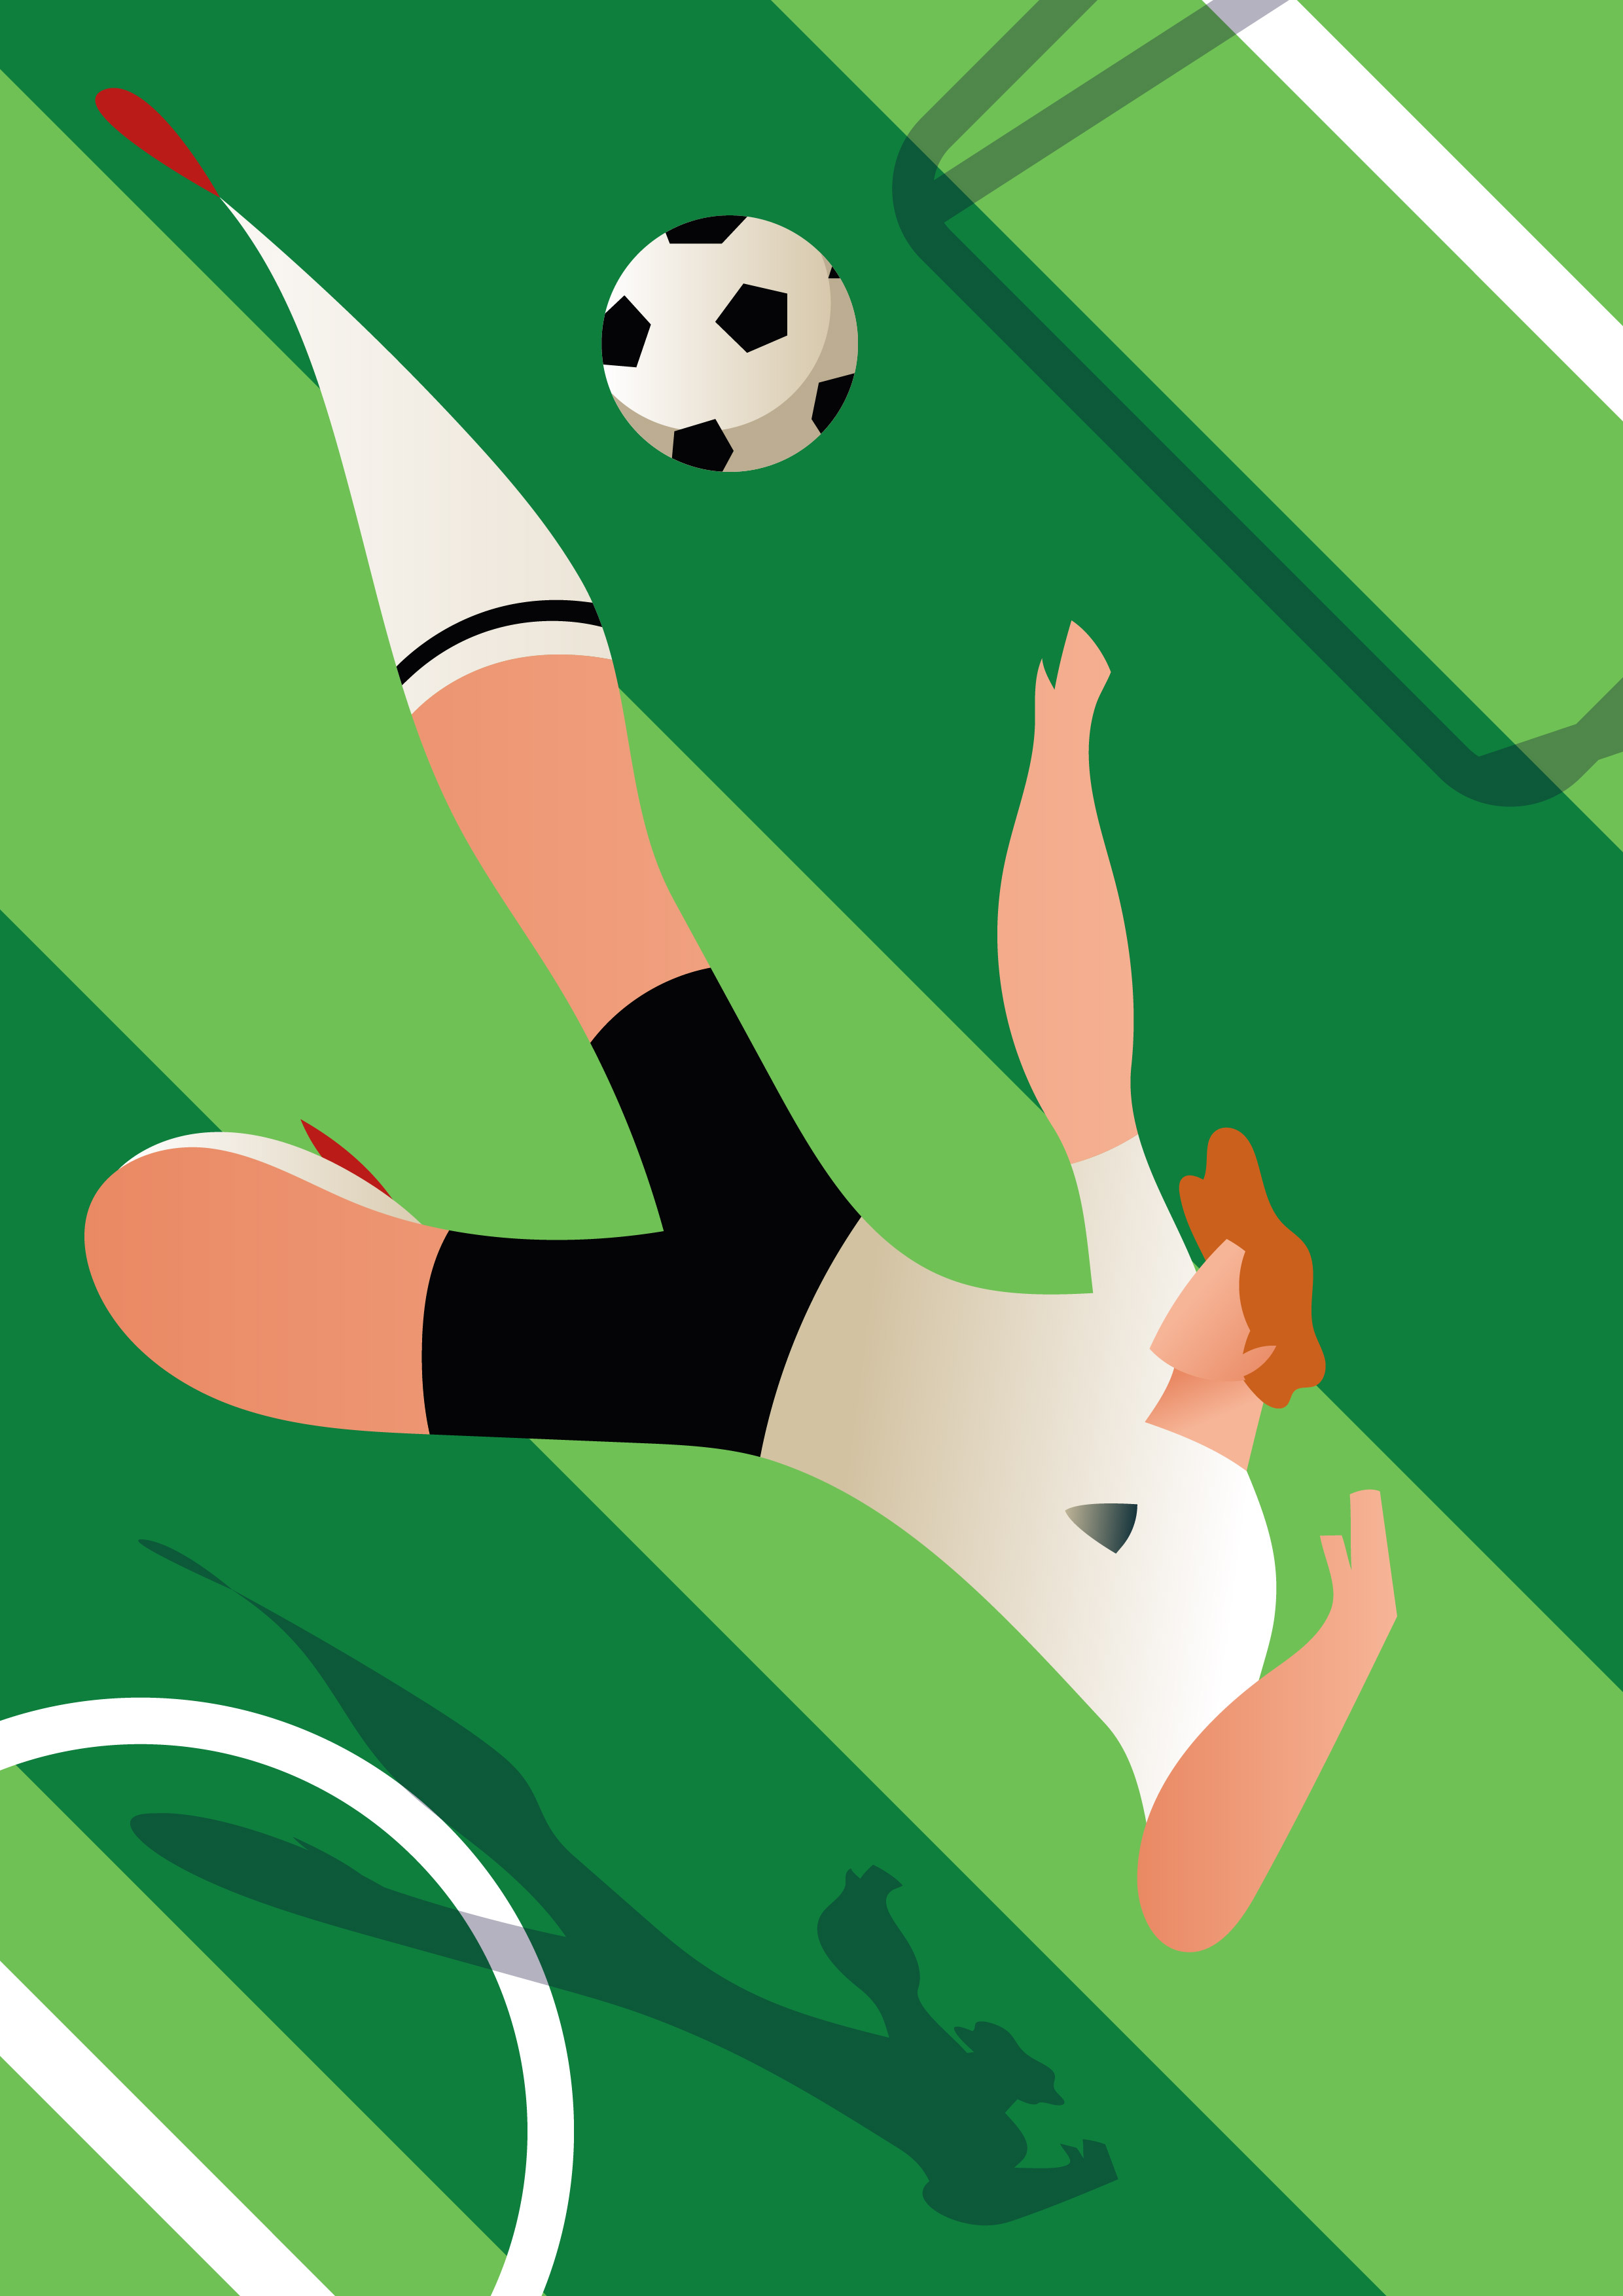 England World Cup Soccer Player Illustration 223255 Vector